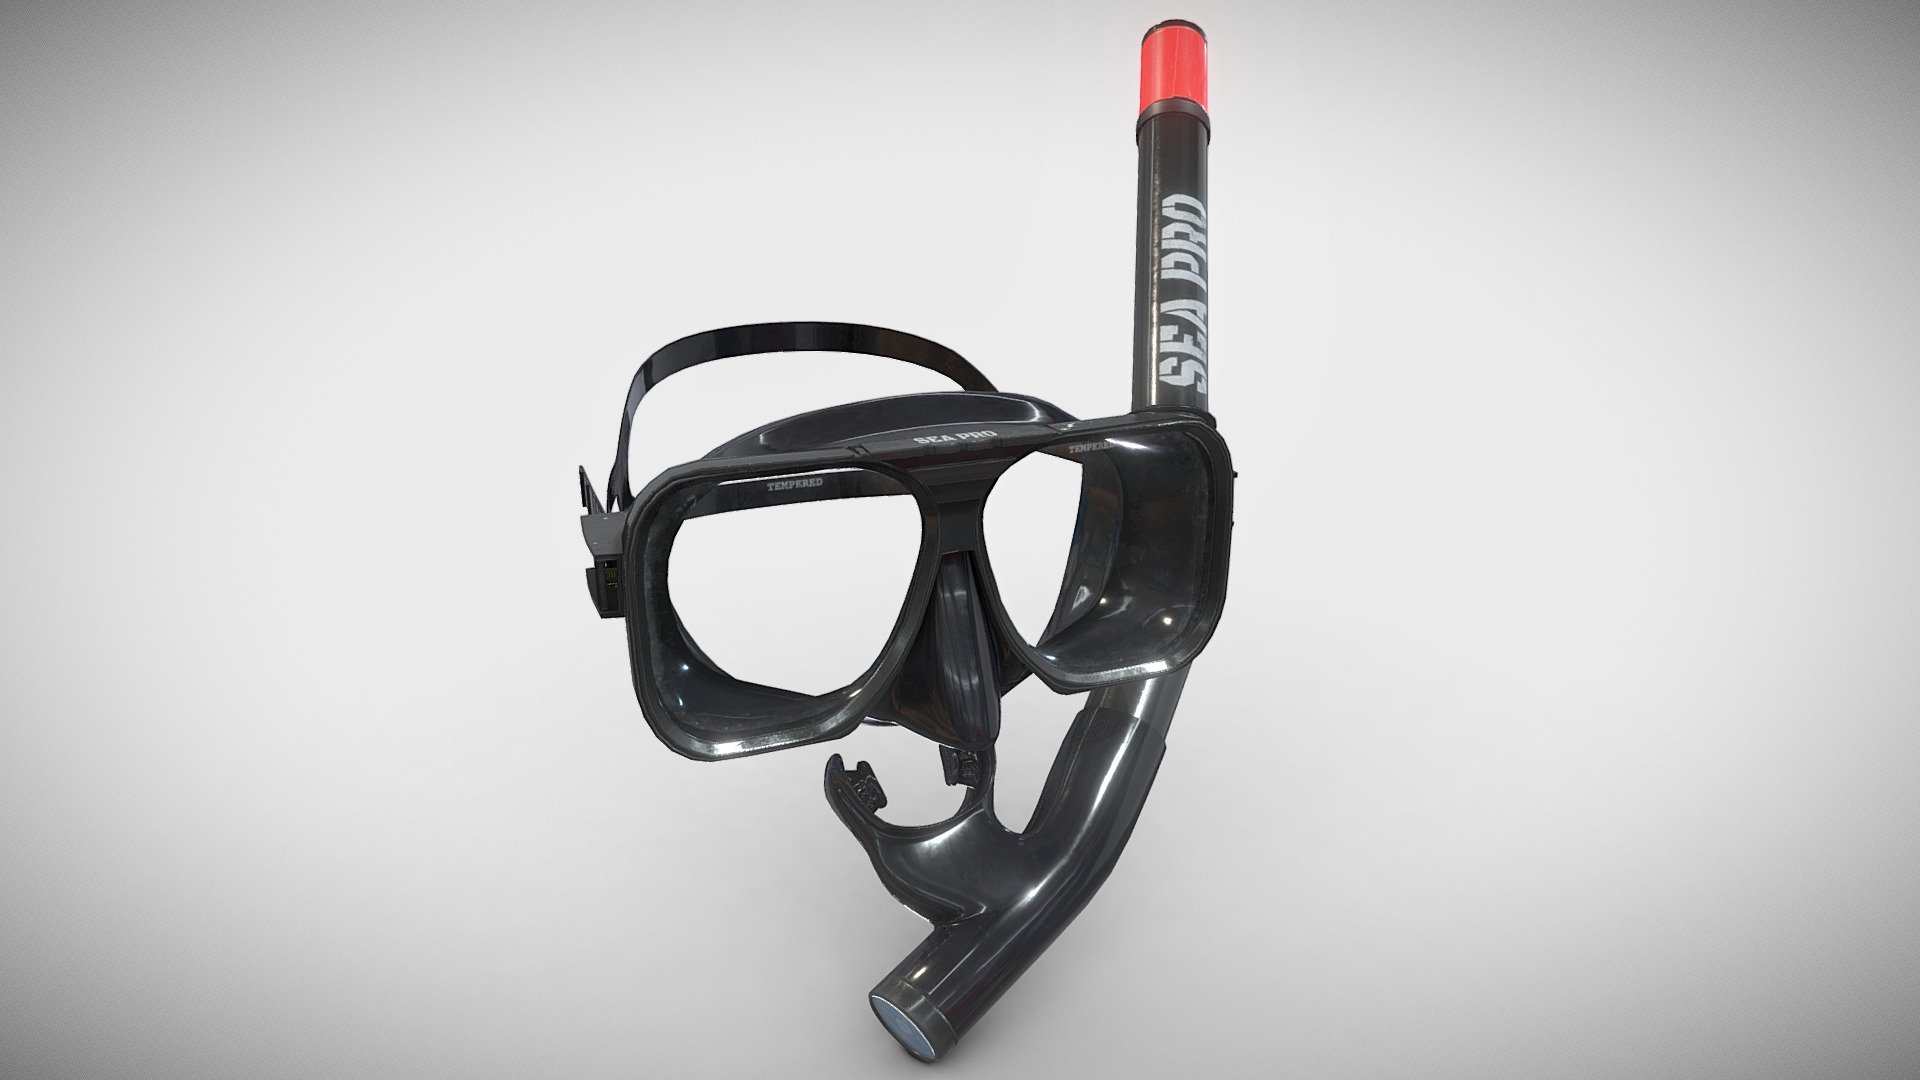 Snorkel set modelled in Blender and shaded in Substance Painter. 
Mesh and textures are optimised to be used in games.

The additional .zip file contains the original substance file of this project.

Please enjoy! - Scuba Goggles And Snorkel - Download Free 3D model by Turtle_Flipper (@milansaman21) 3d model